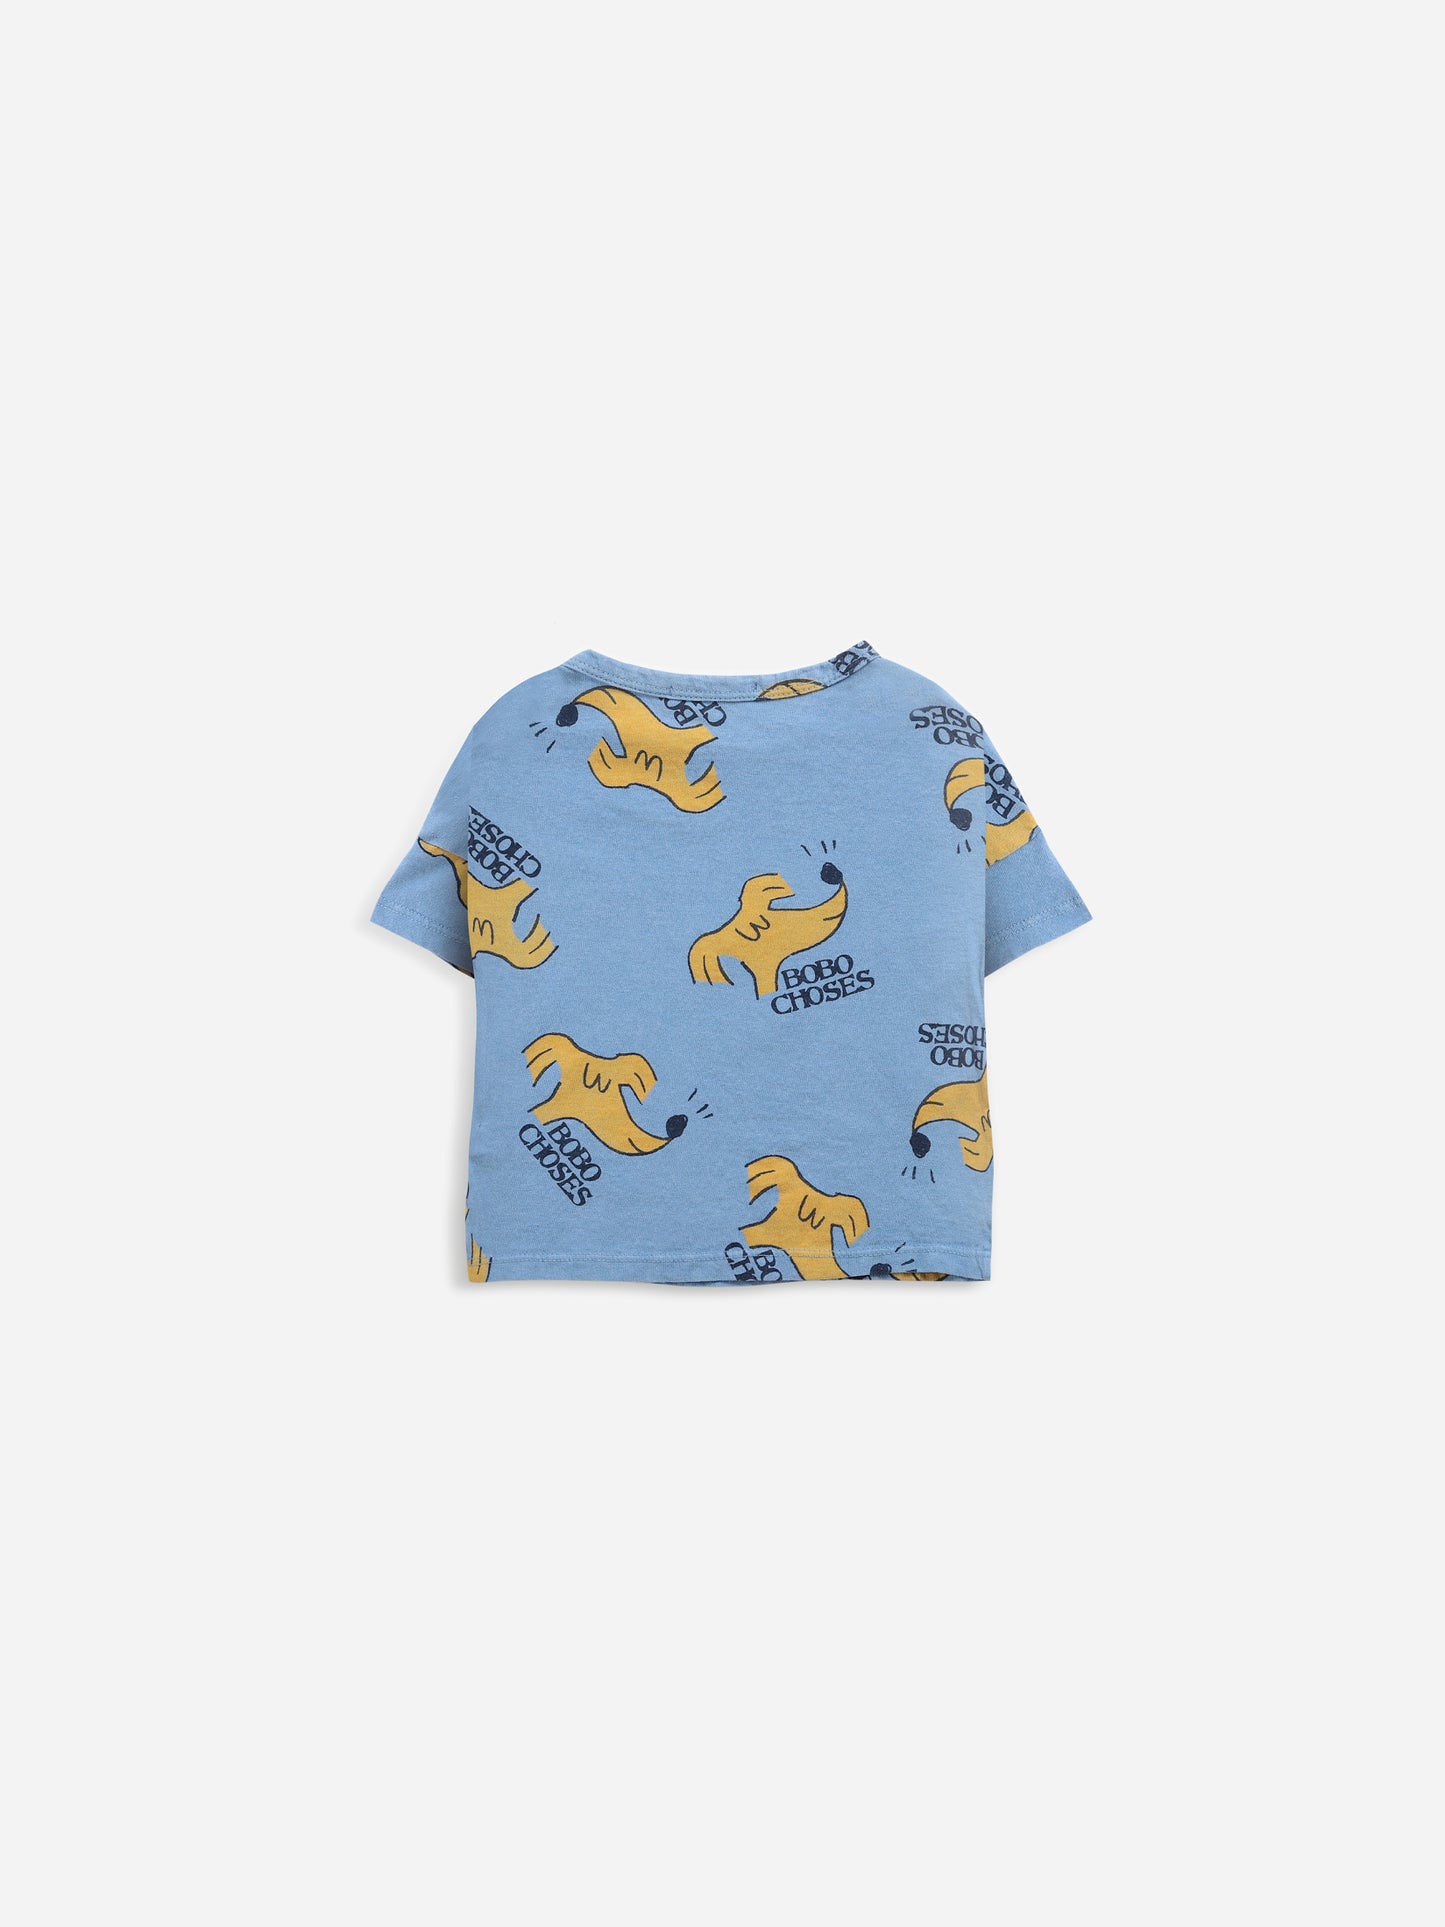 Sniffy Dog All Over Short Sleeve T-Shirt